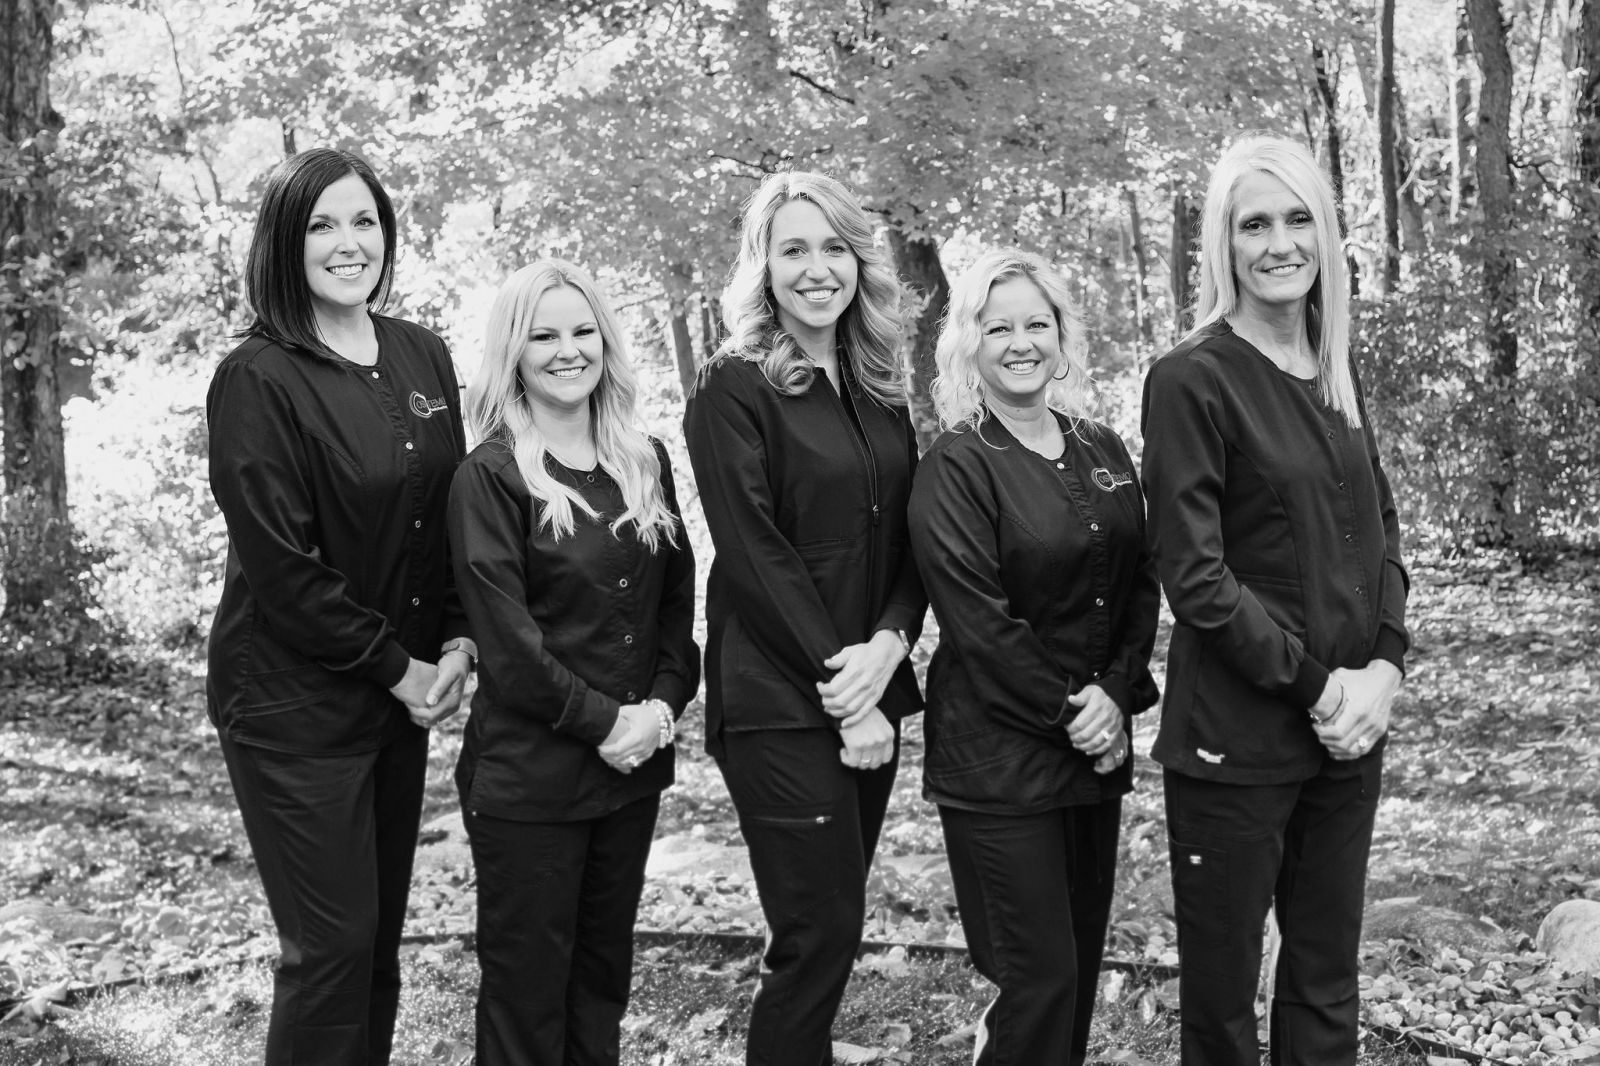 Our Dental Hygienists